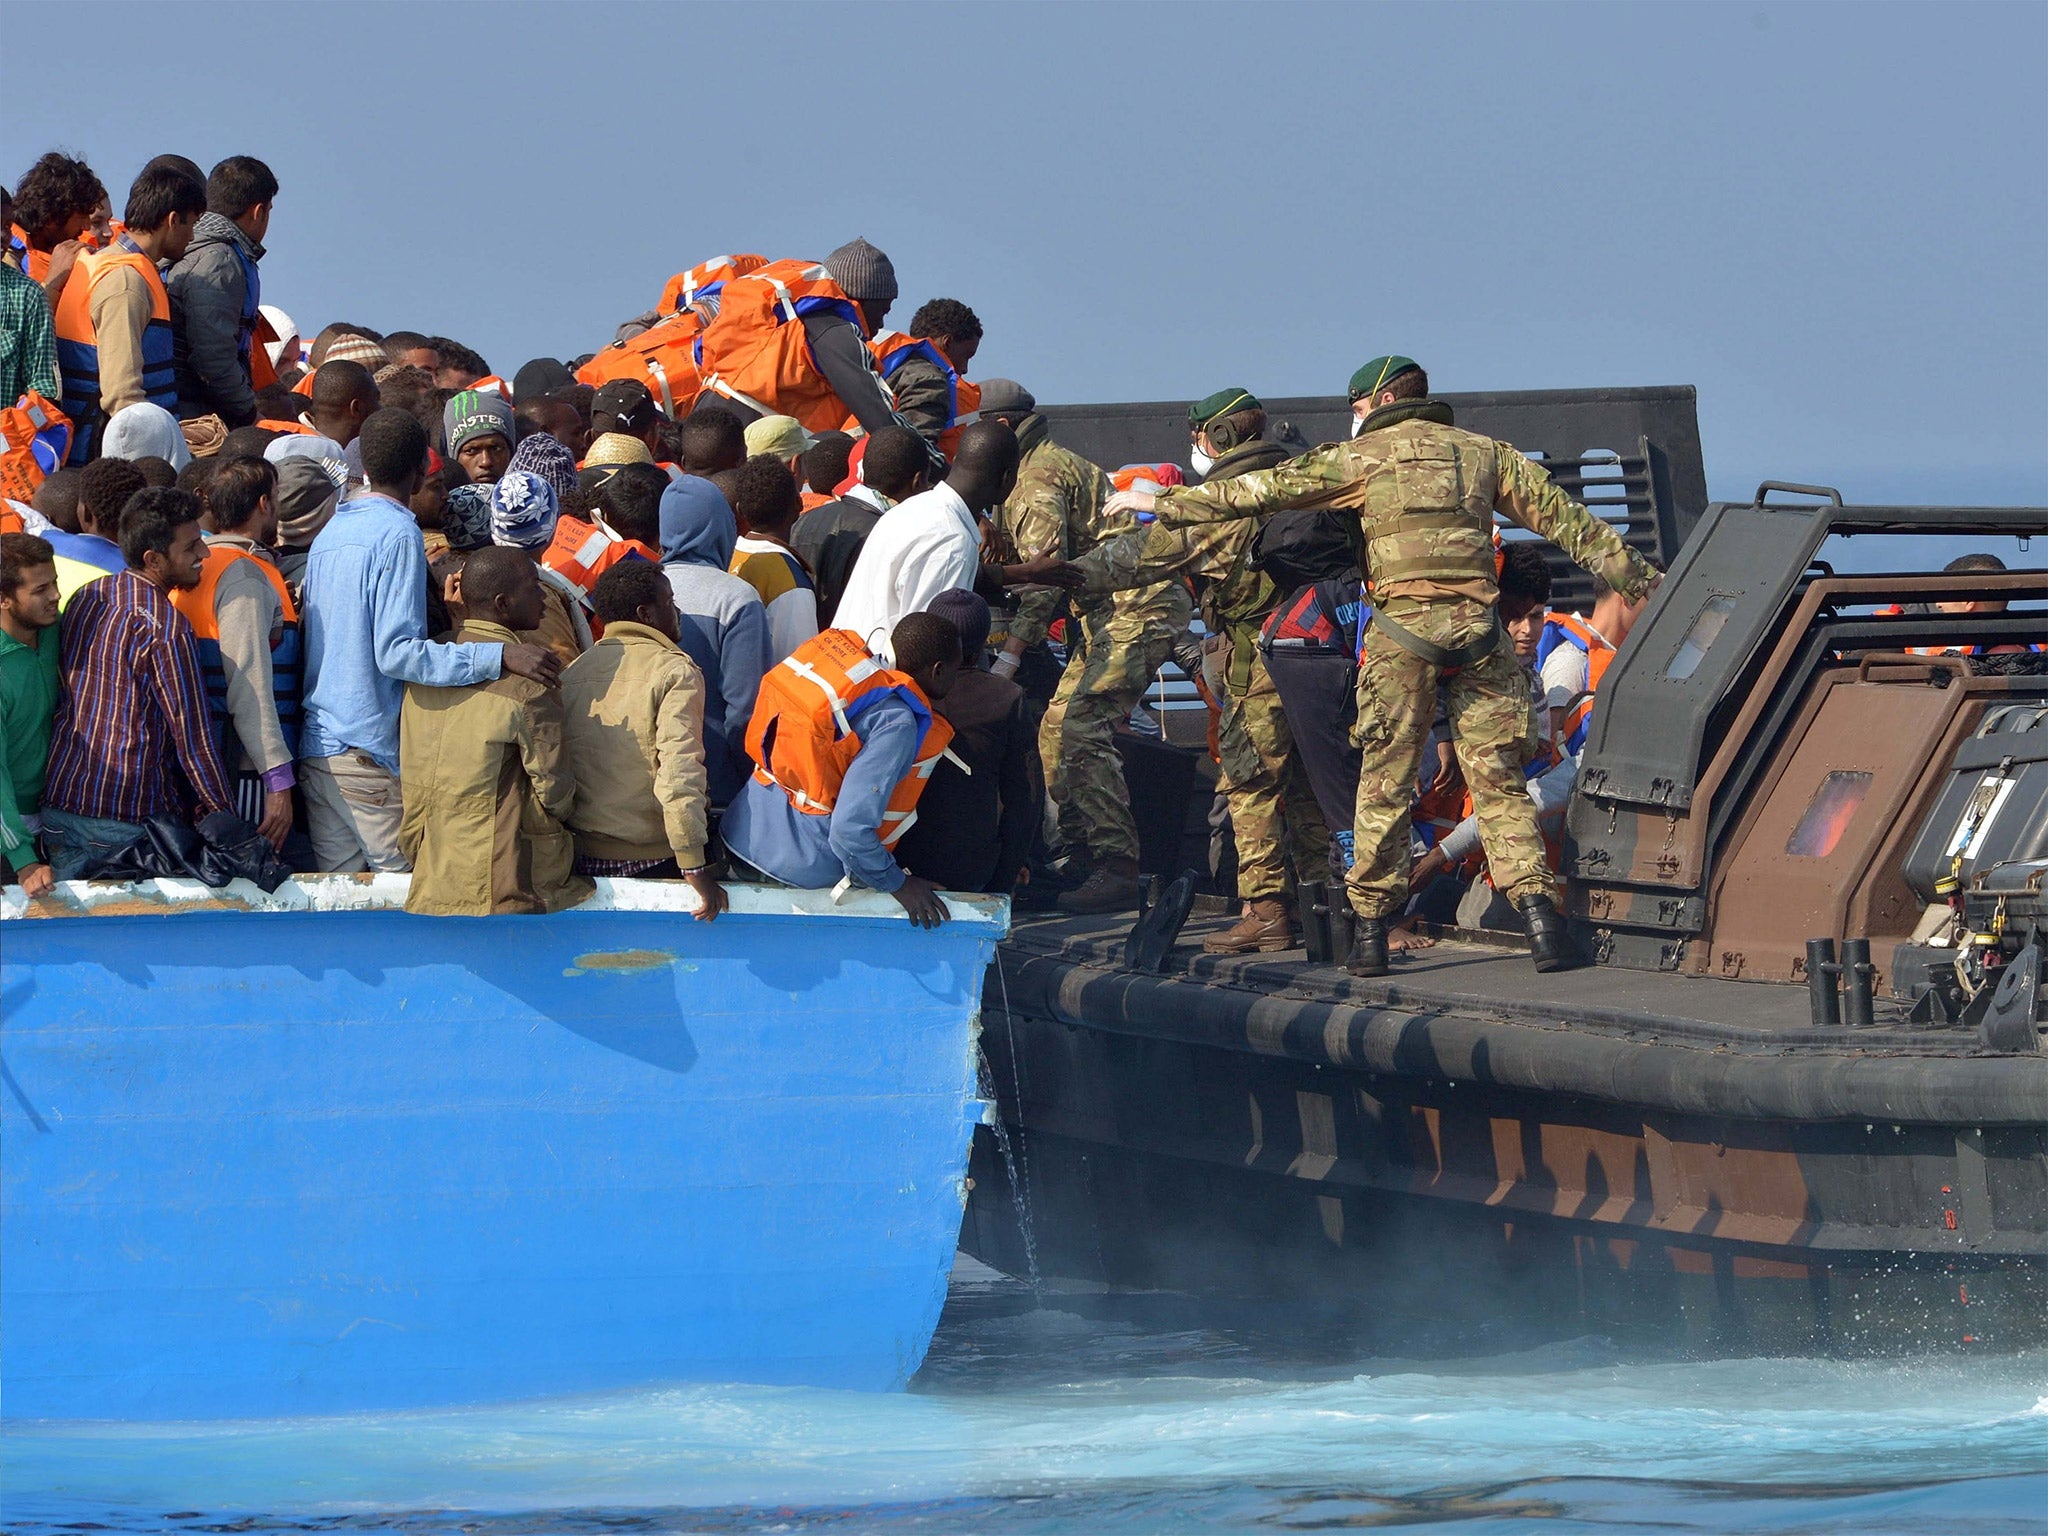 Royal Marines from HMS 'Bulwark' rescue migrants off the coast of Libya